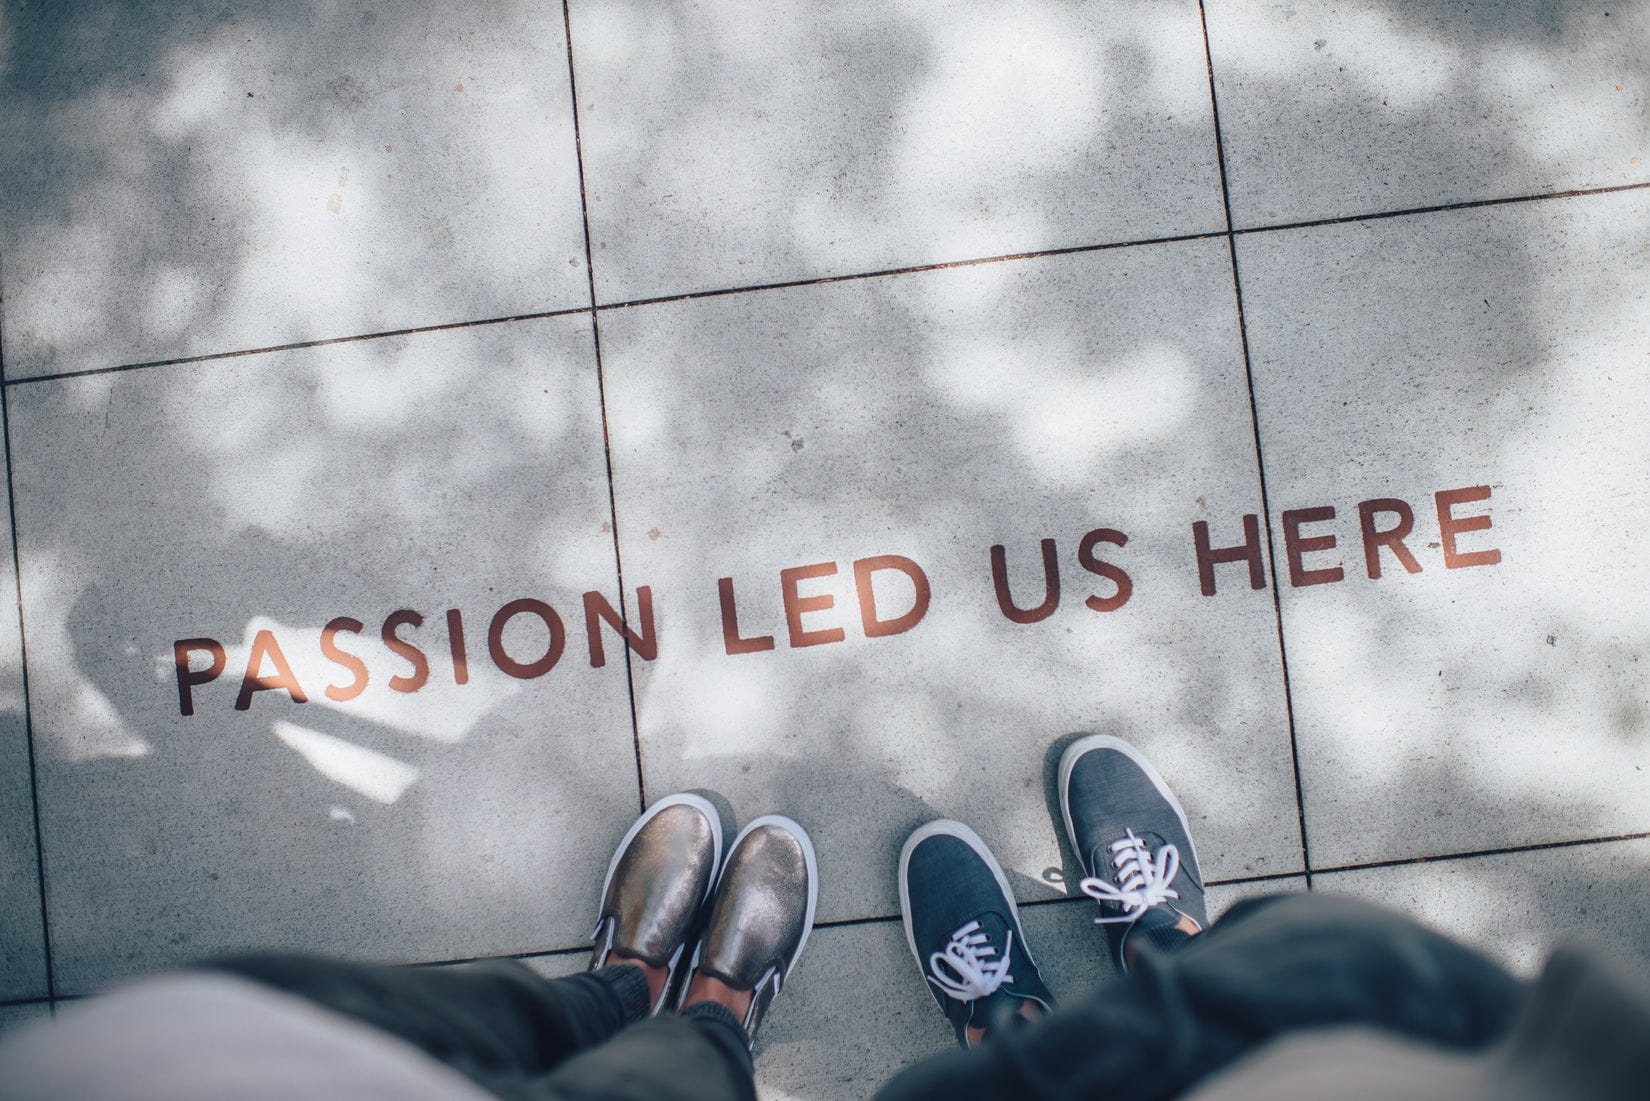 Two people’s feet standing near a sidewalk that says “Passion led us here”